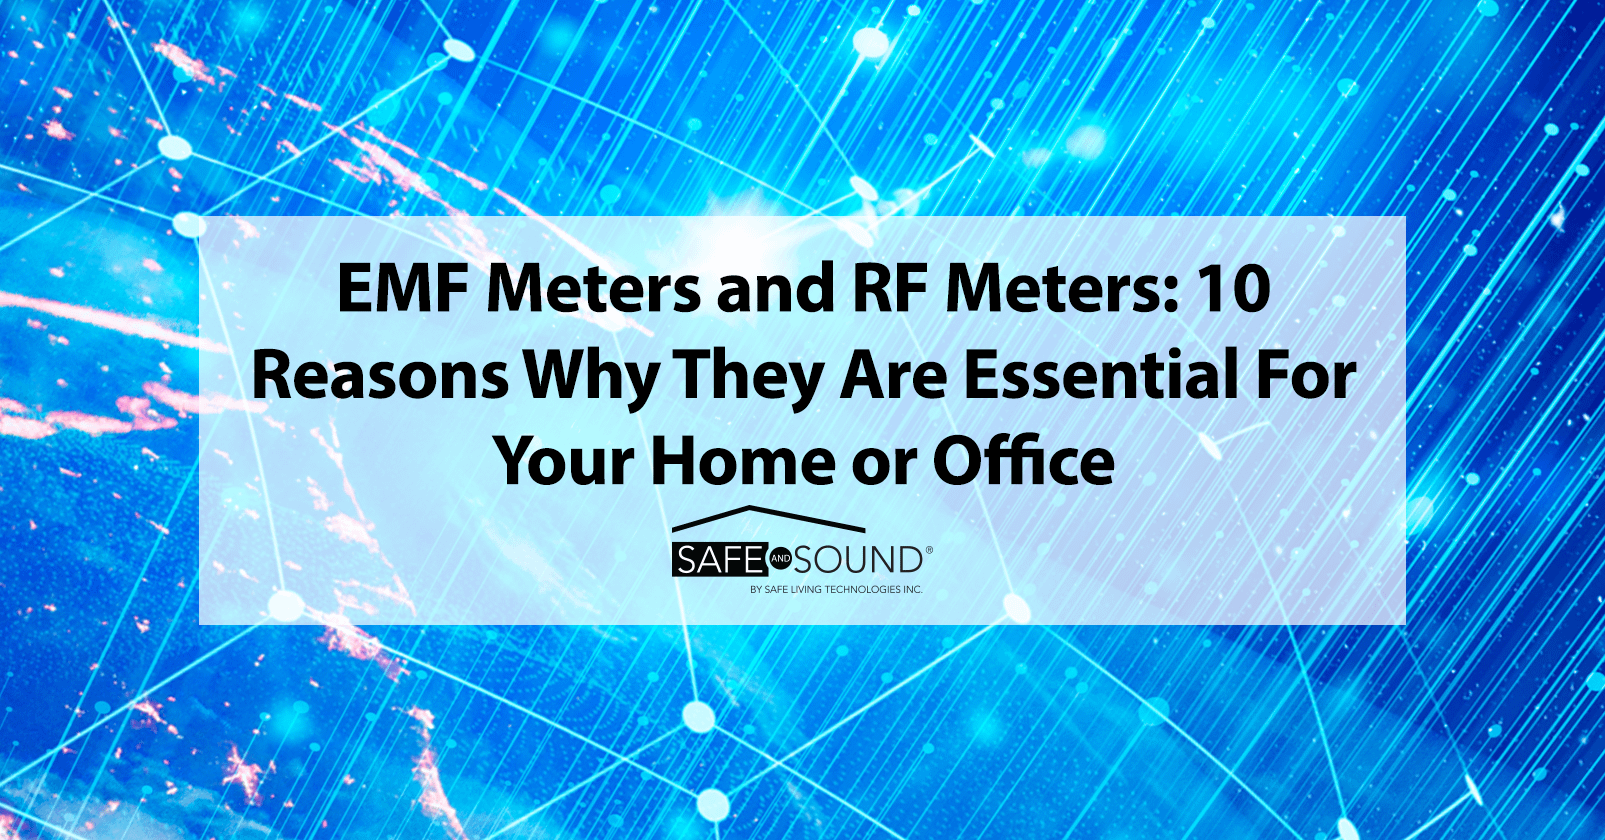 EMF Meters and RF Meters: 10 Reasons Why They Are Essential for Your Home or Office